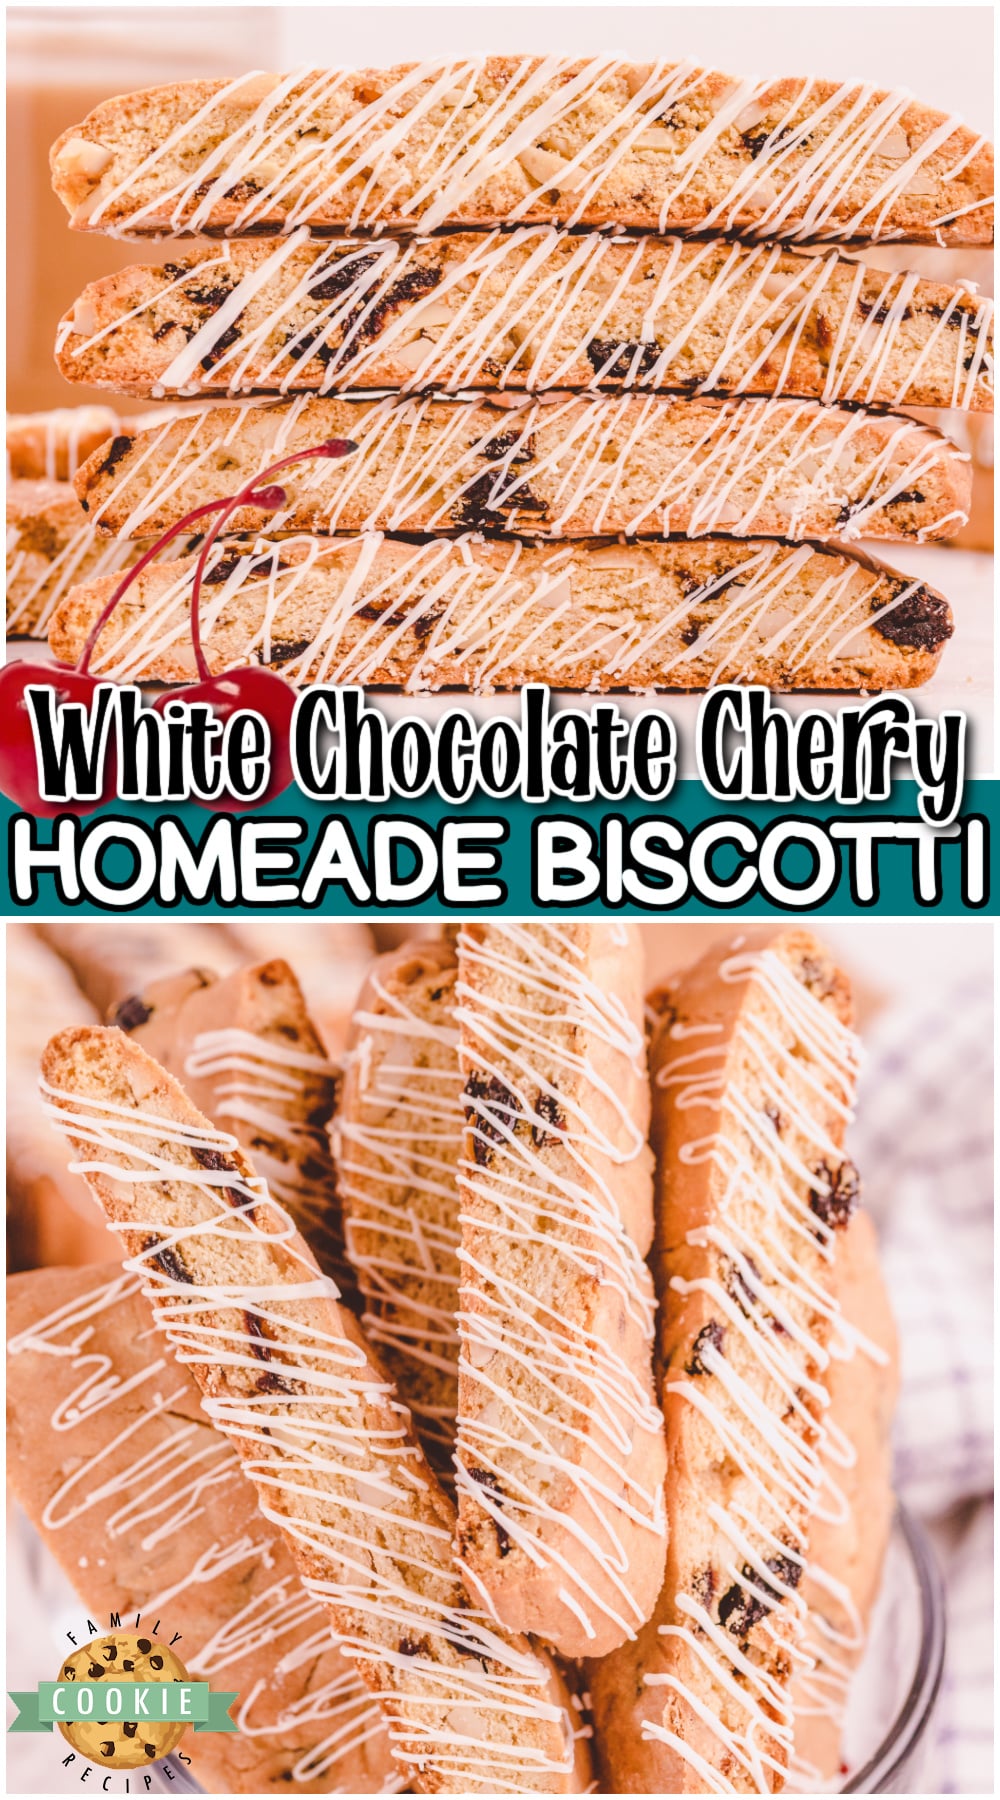 Made with dried cherries & slivered almonds, this homemade cherry biscotti recipe feels fancy and indulgent. Perfect treat for your morning coffee or tea!